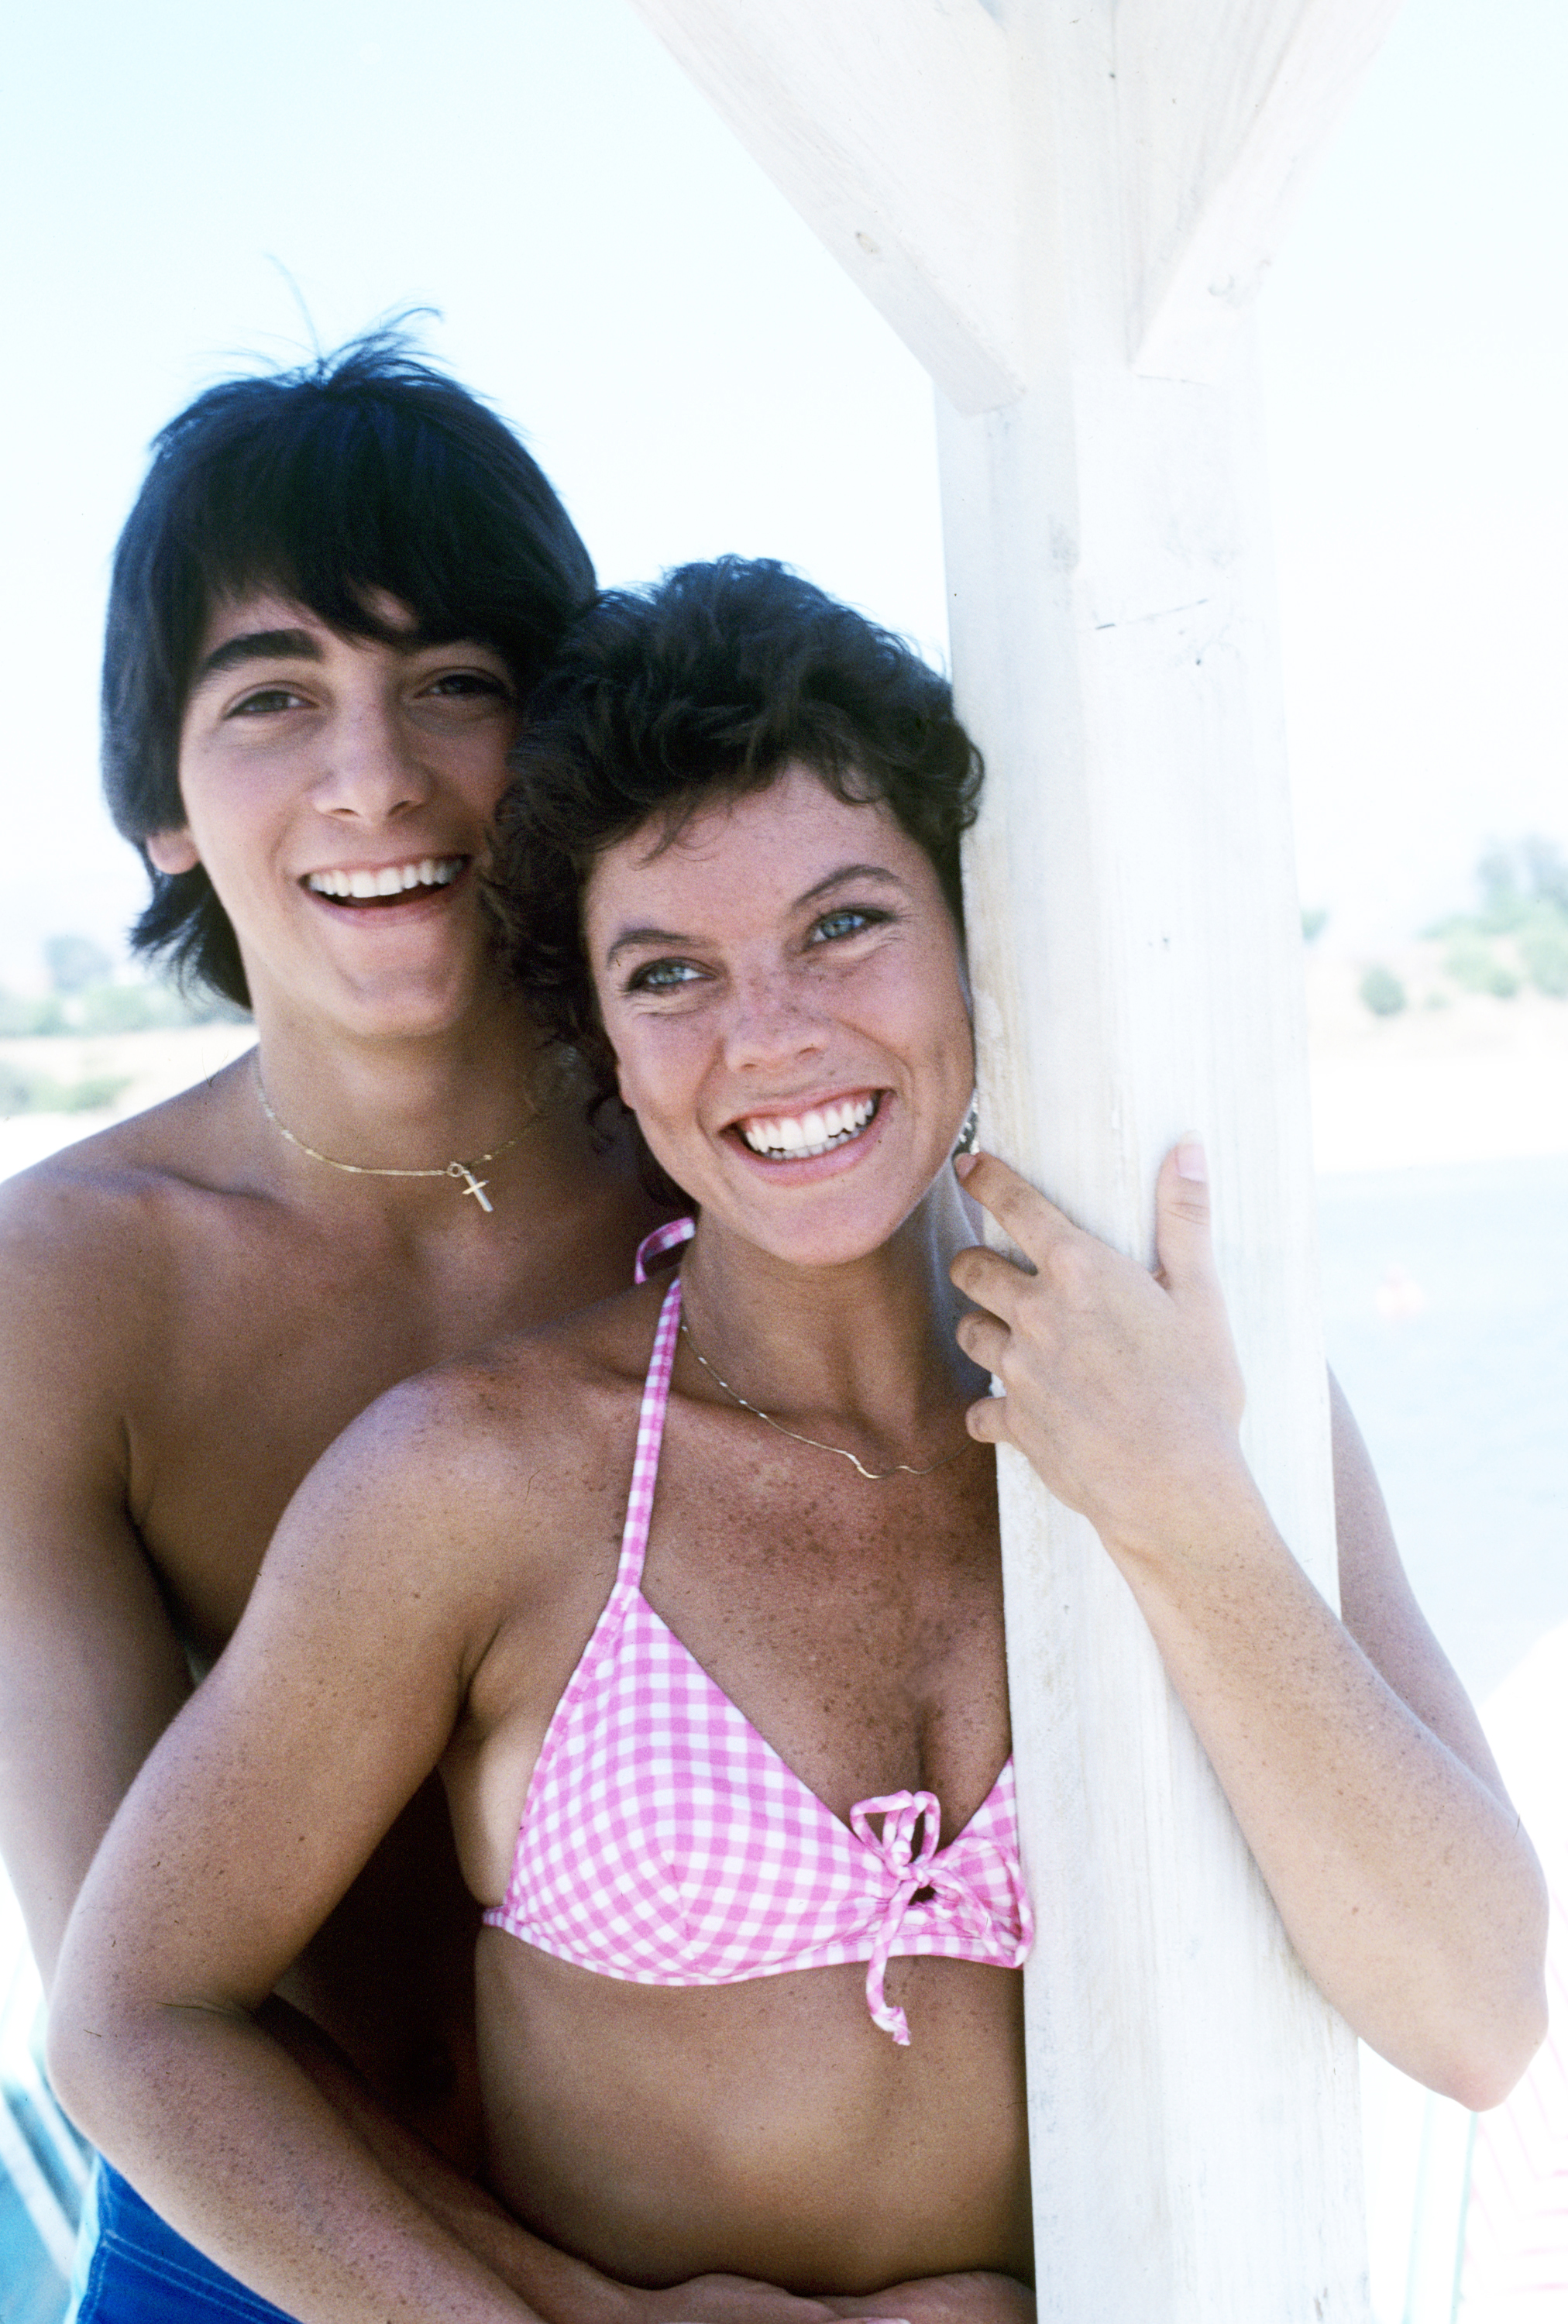 Scott Baio and Erin Moran on the set of "Happy Days" on October 6, 1981 | Source: Getty Images